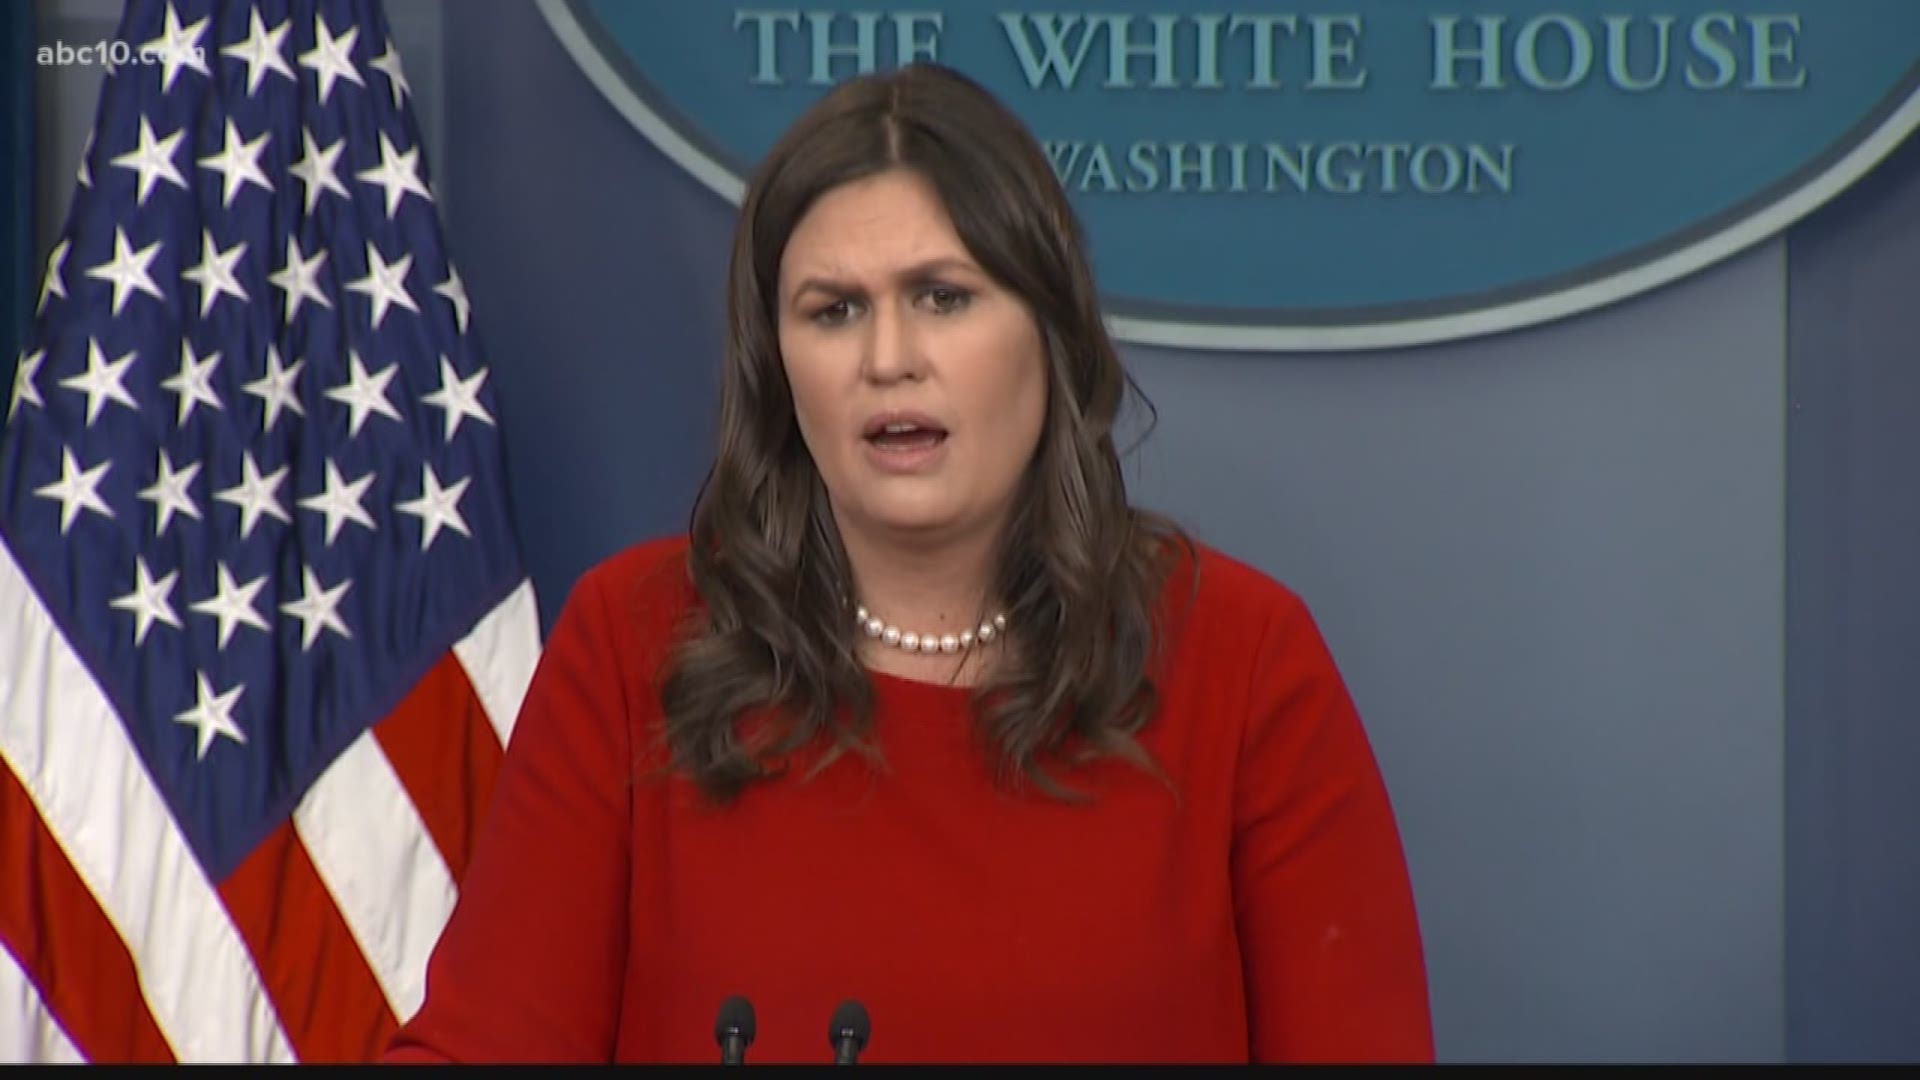 The White House, more specifically White House press secretary Sarah Huckabee Sanders, said Wednesday the federal government will not investigate the Stephon Clark shooting.